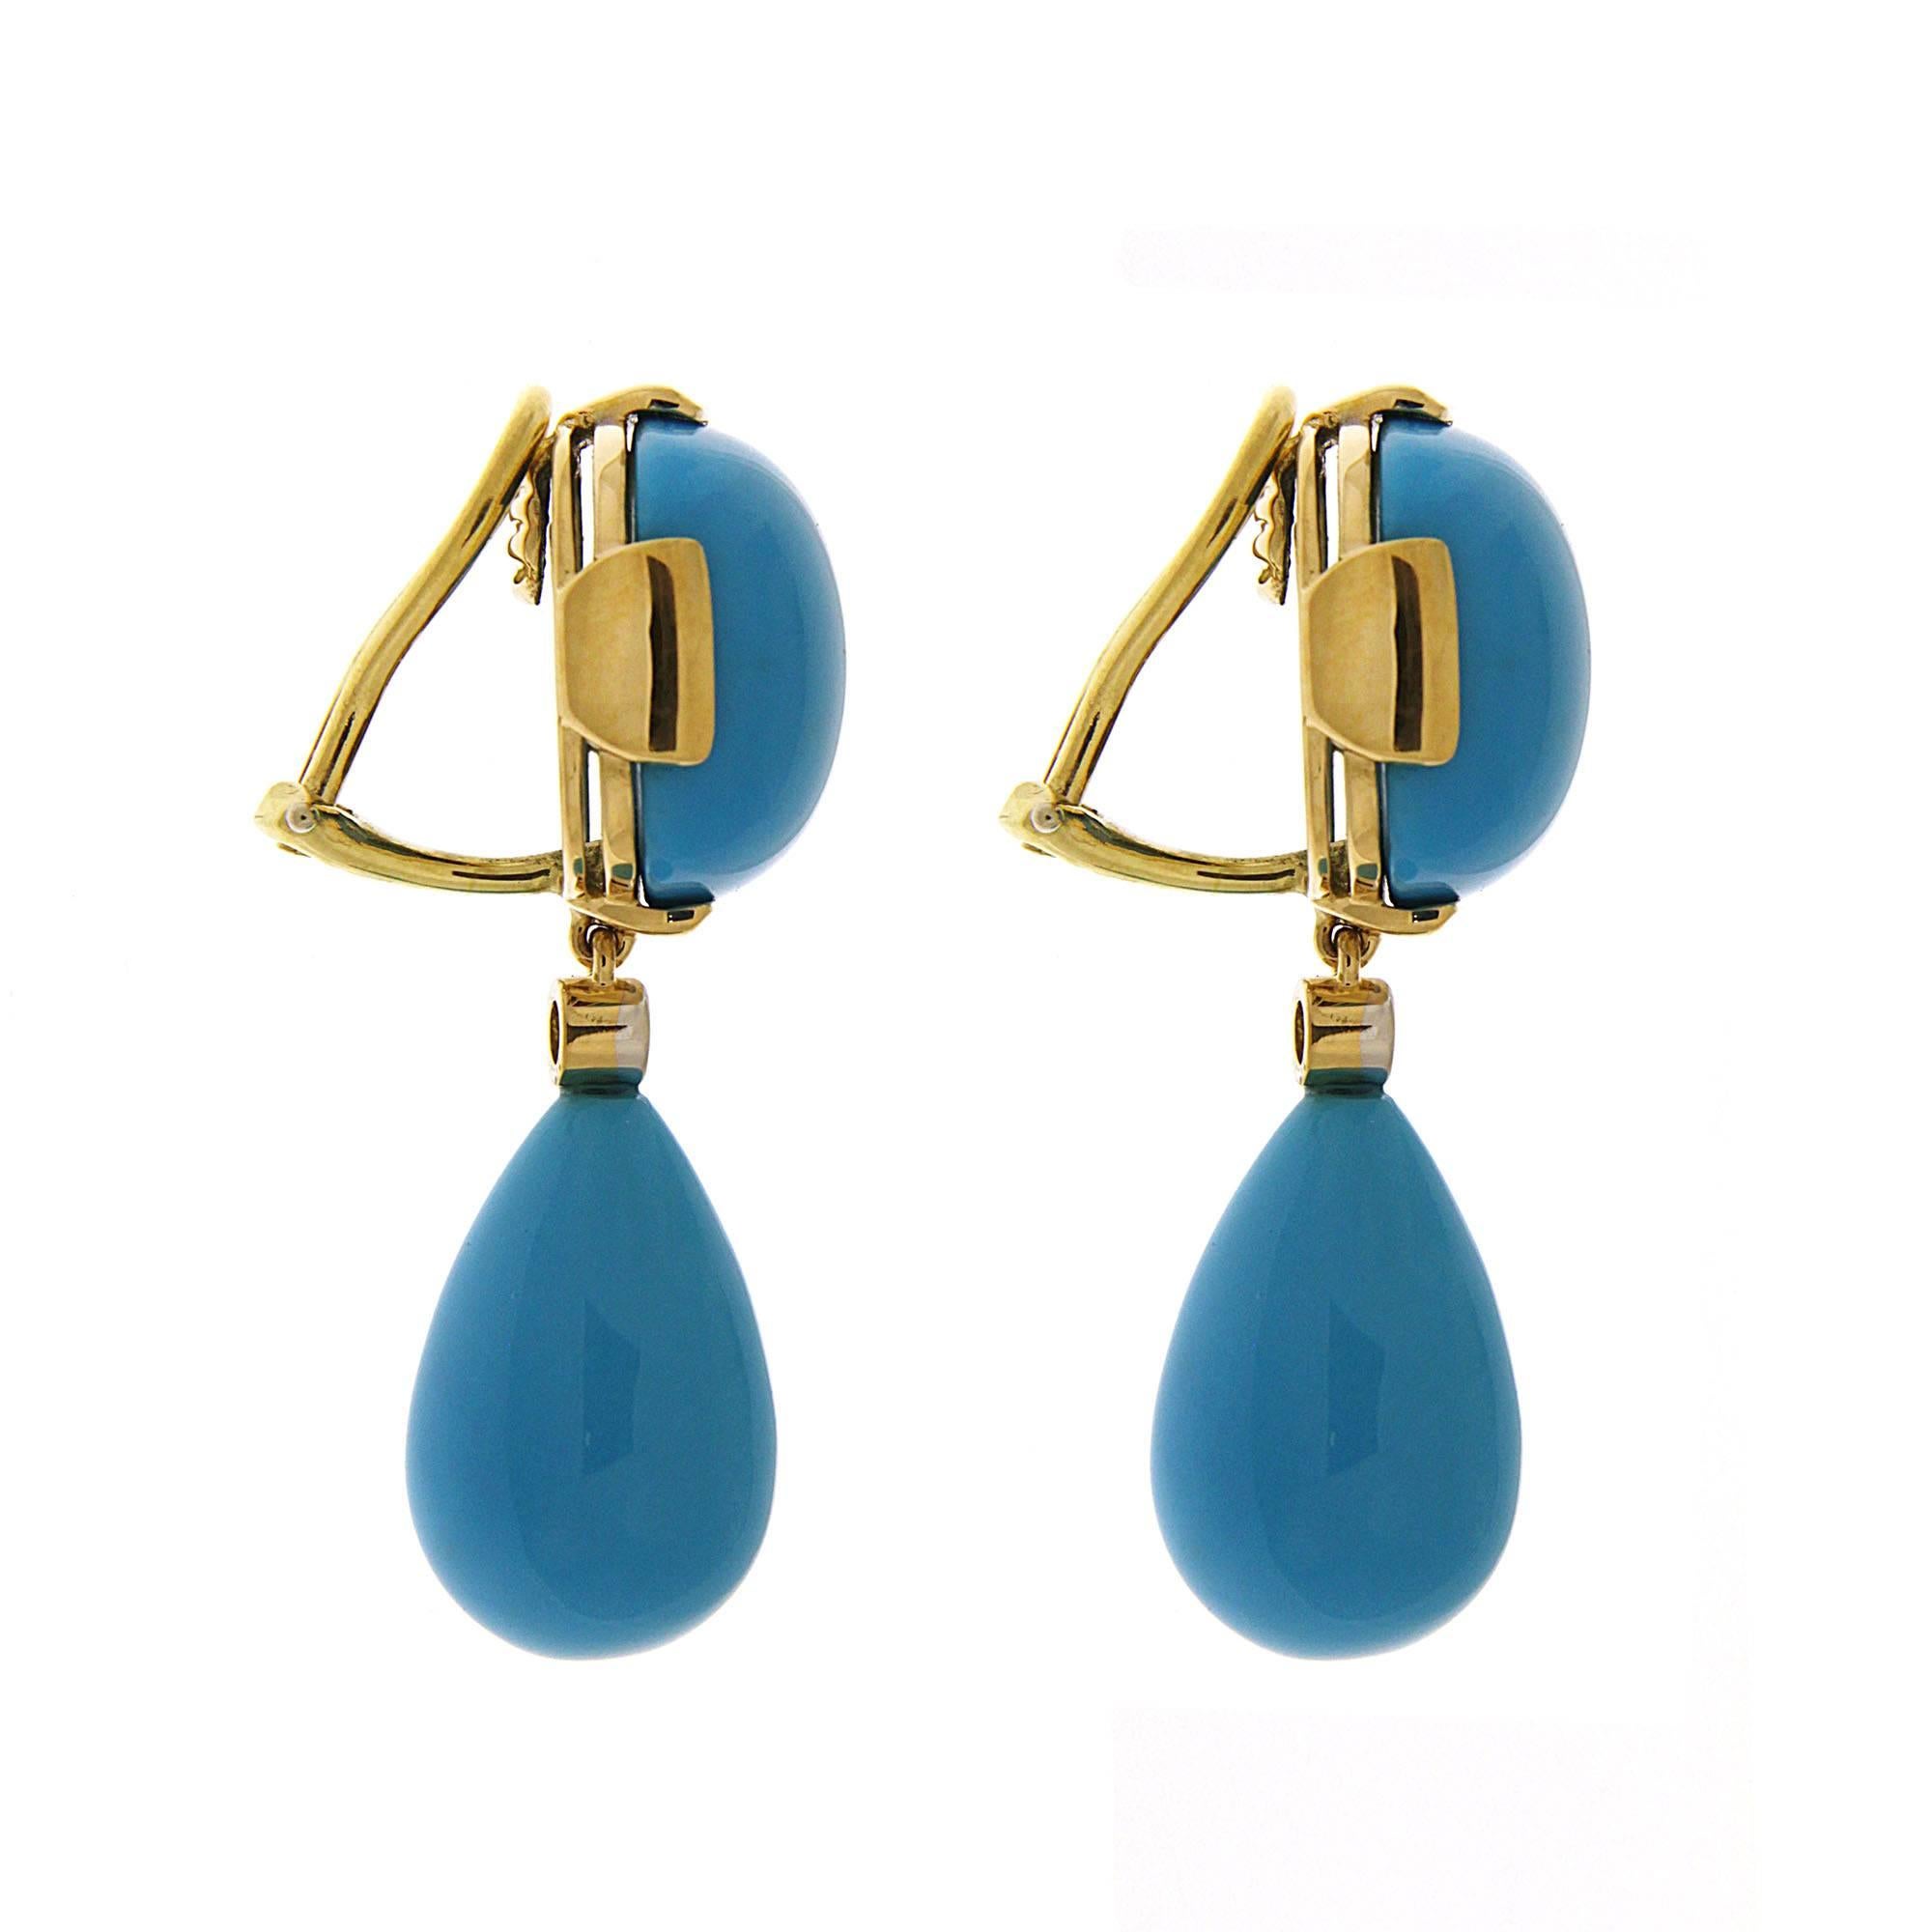 One of the most iconid designs, this lovely pair of earrings features cushion cut Turquoise cabochon and Turquoise drops in 18kt yellow gold with bezel set diamond connectors. The earrings are finished with clip backs. 